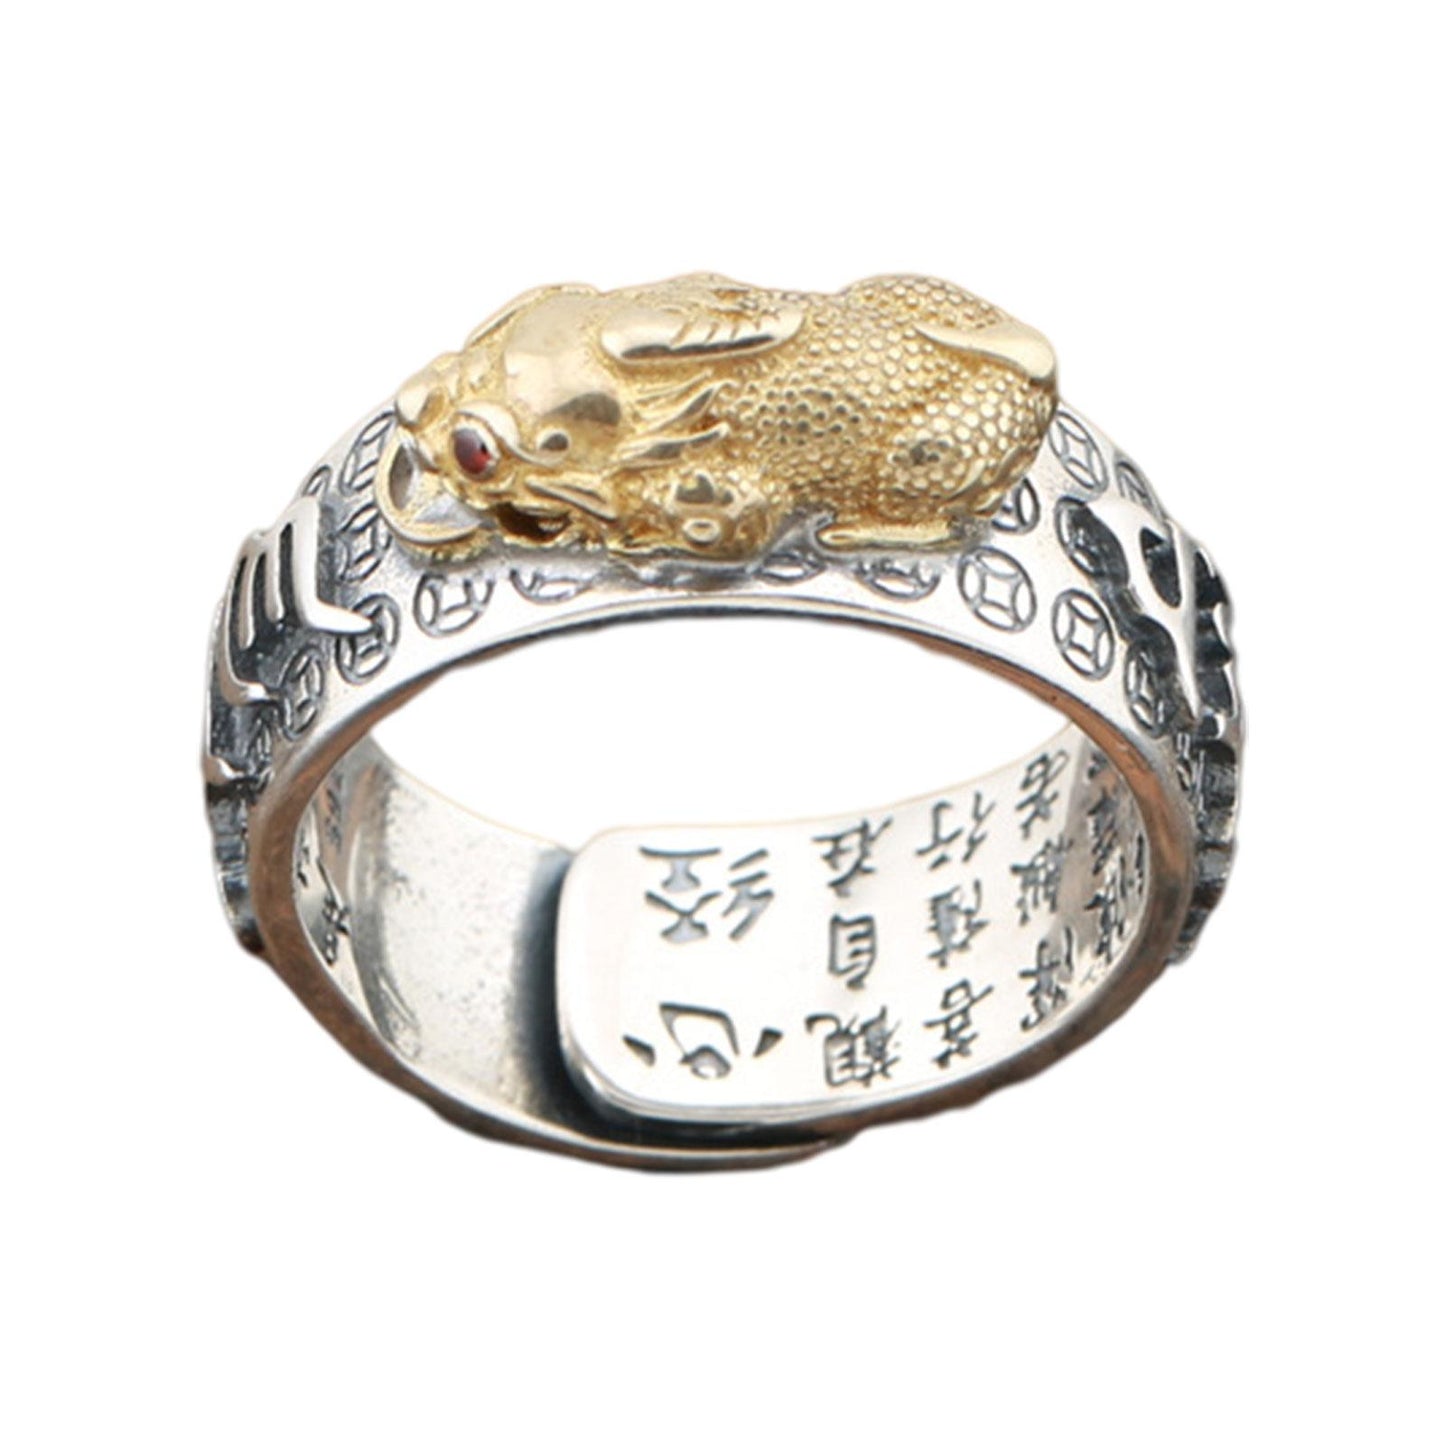 Vintage Original Feng Shui Ring Amulets For Good Luck And Protection Wealth Men's Ring Golden Toad Jewelry Rings For Men Women - Bonnie Lassio